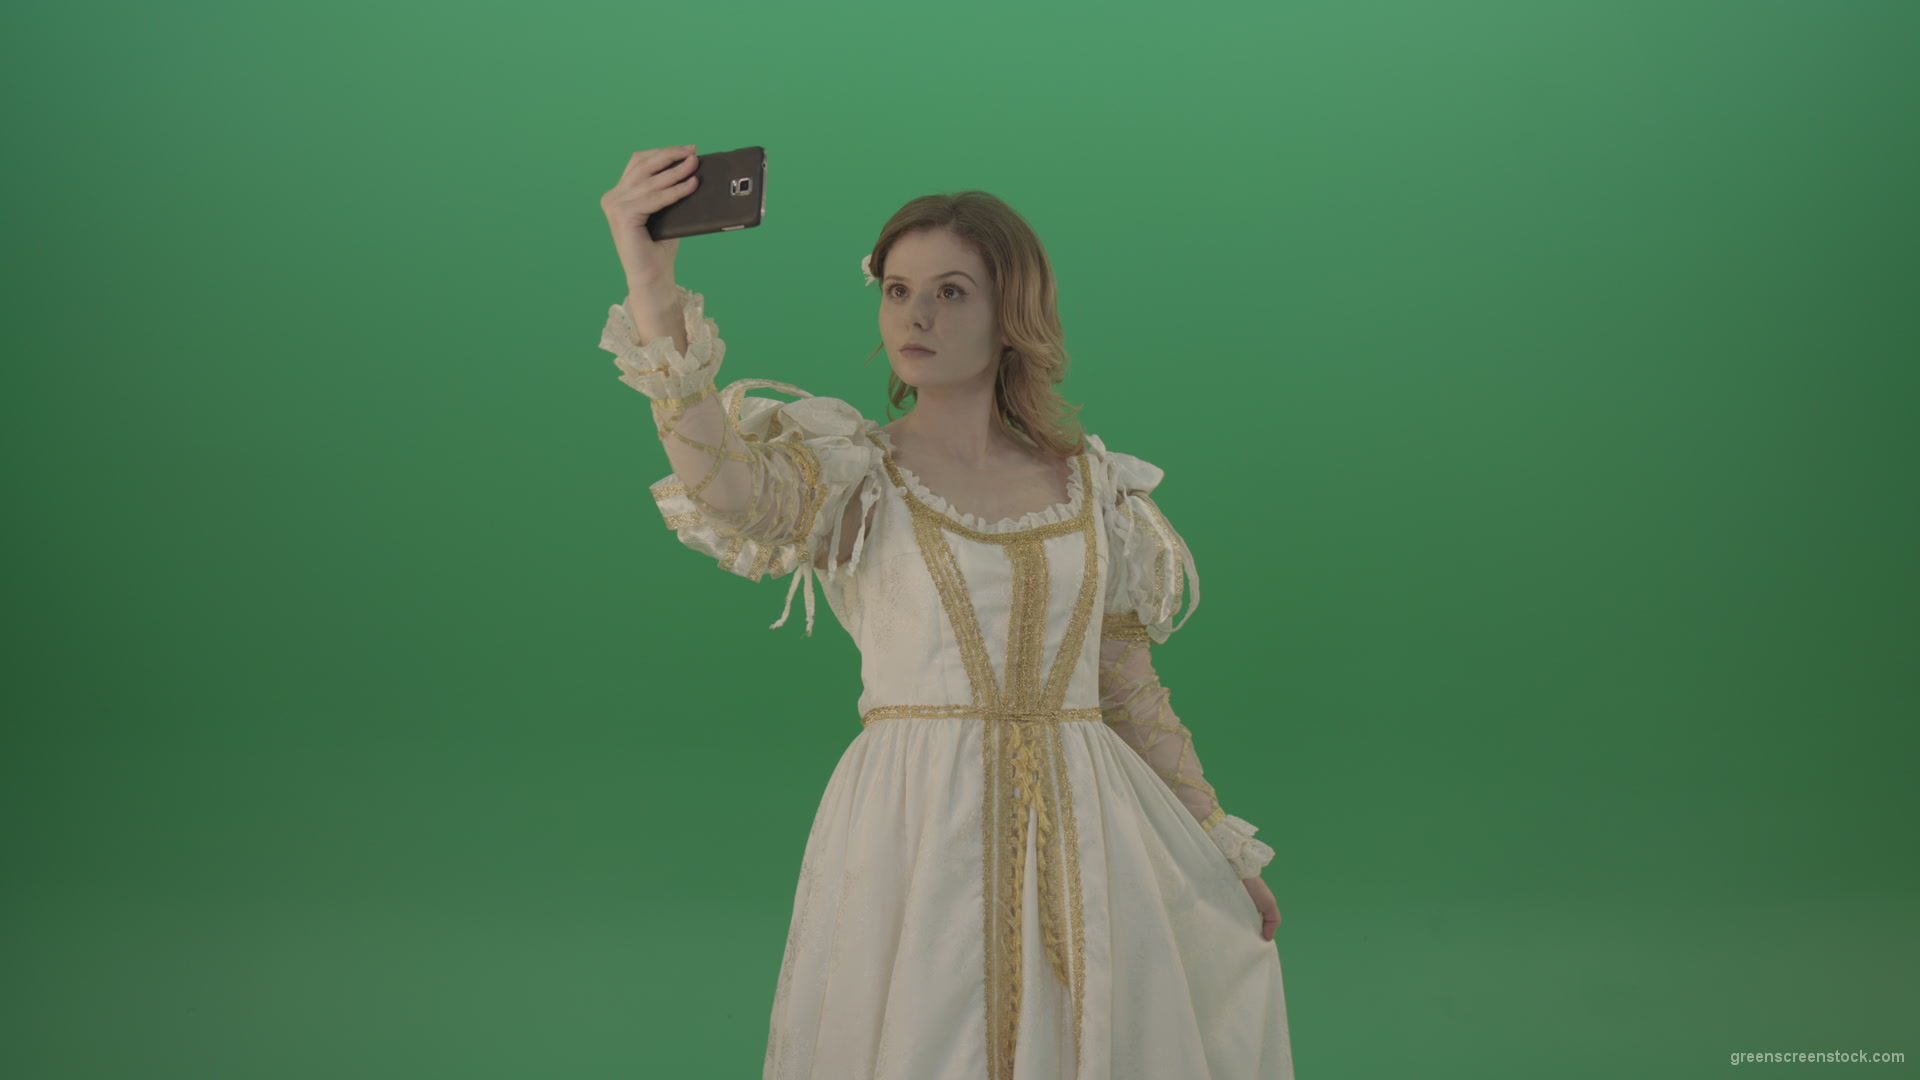 Princess-girl-dressed-in-a-light-suit-makes-a-sephi-on-a-modern-phone-isolated-on-chromakey-background_004 Green Screen Stock